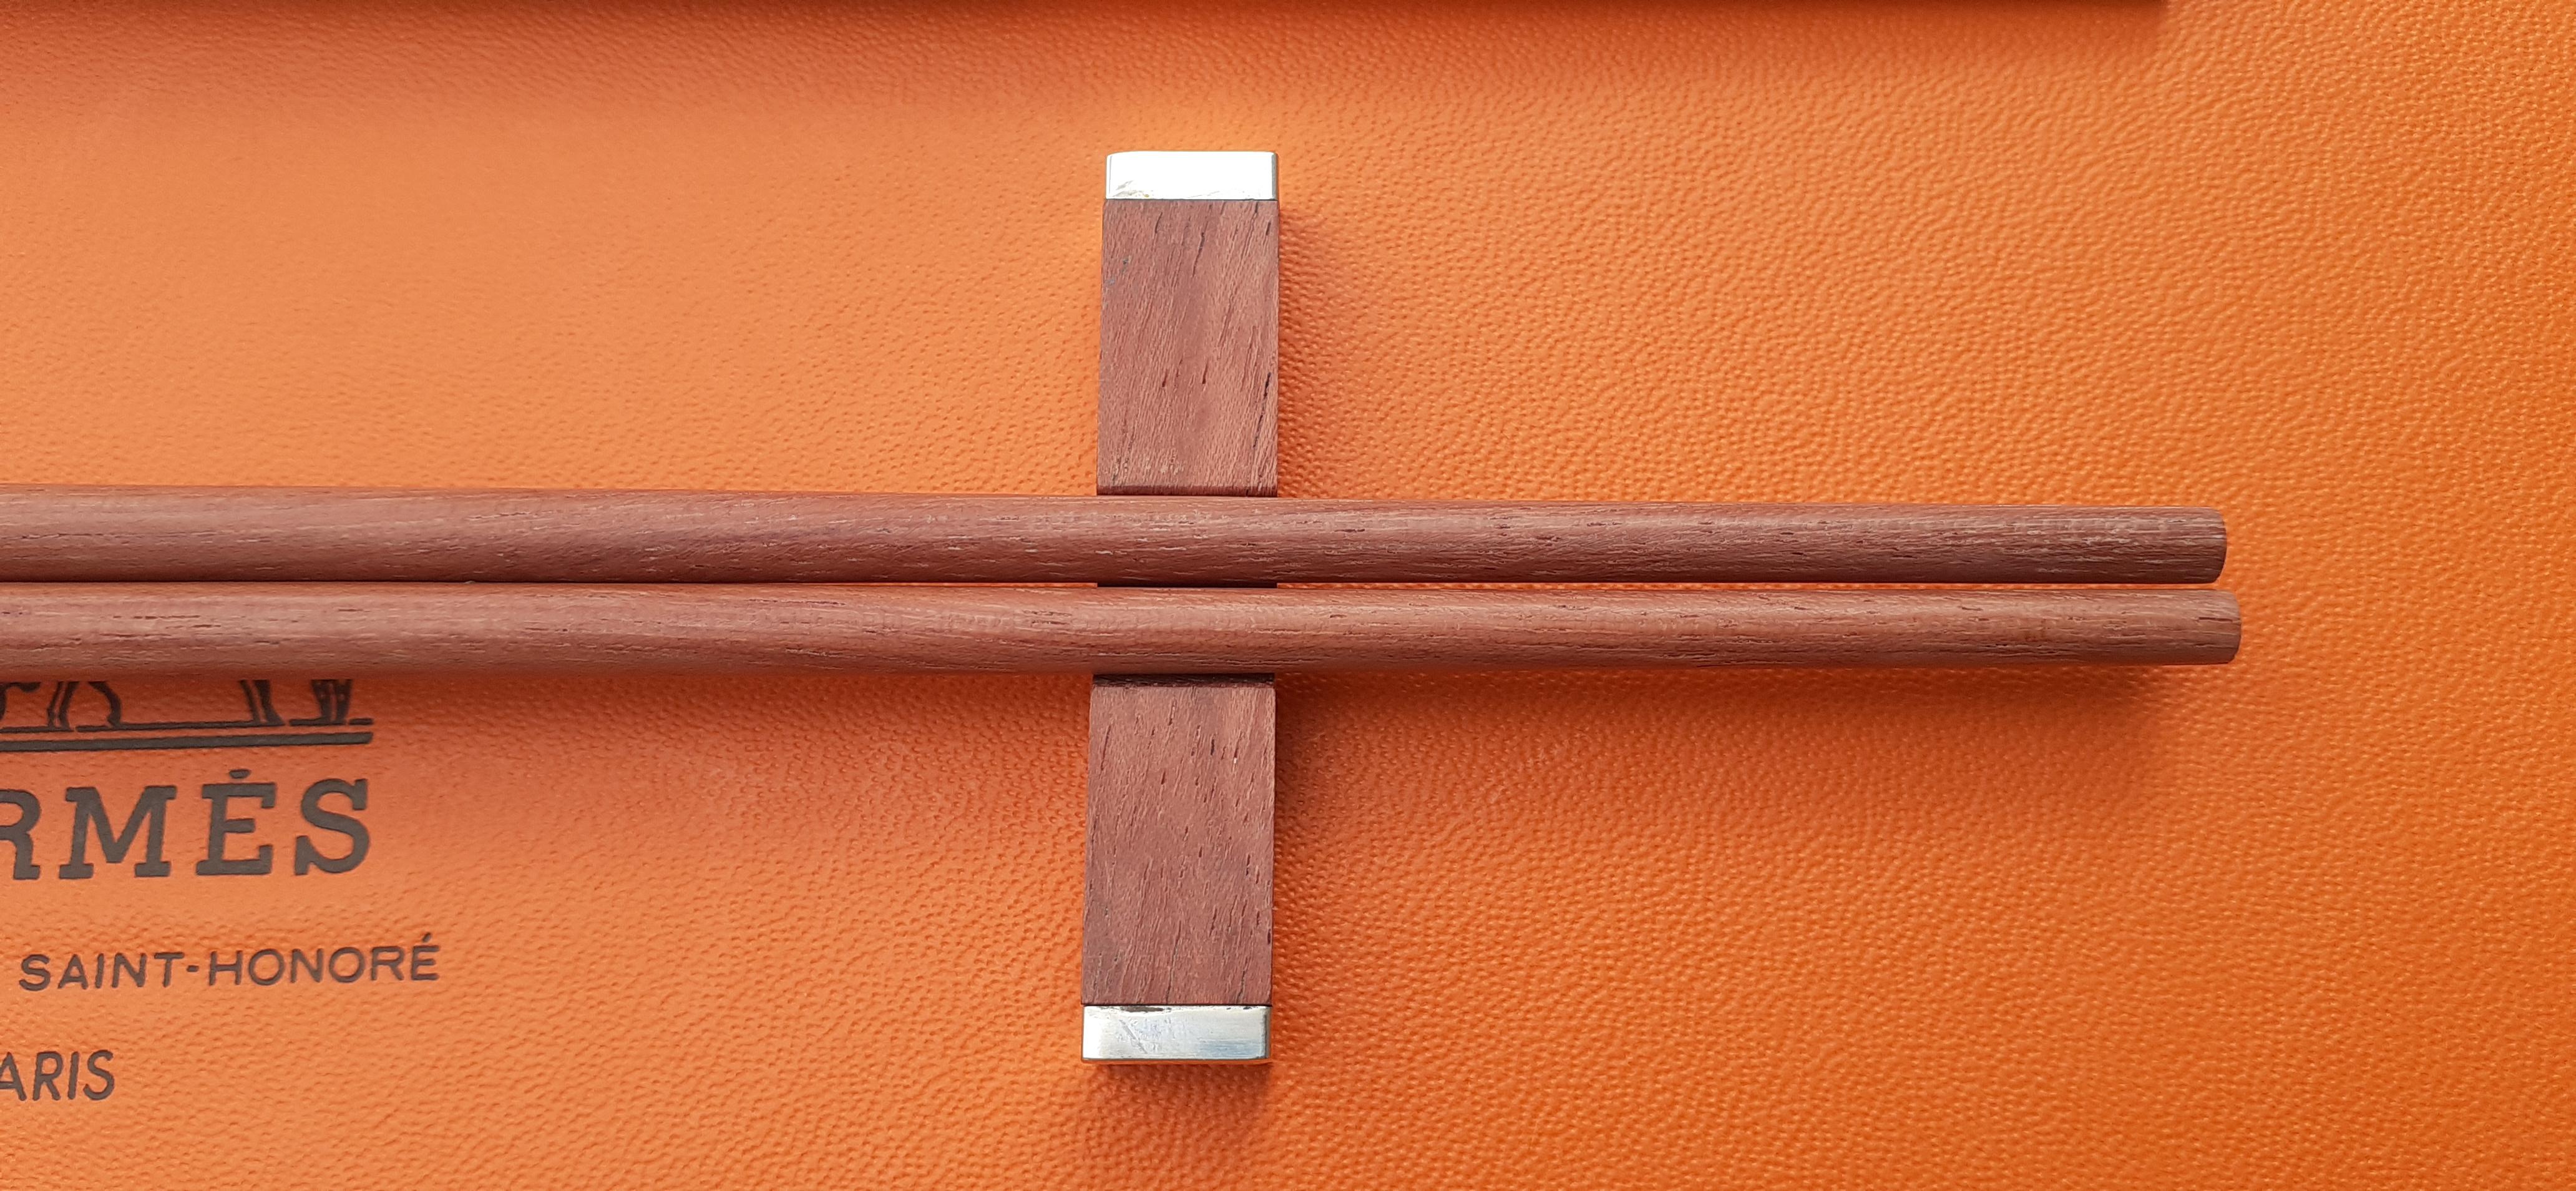 Exceptional Hermès Set of 2 pairs of Chopsticks in wood For Sale 5